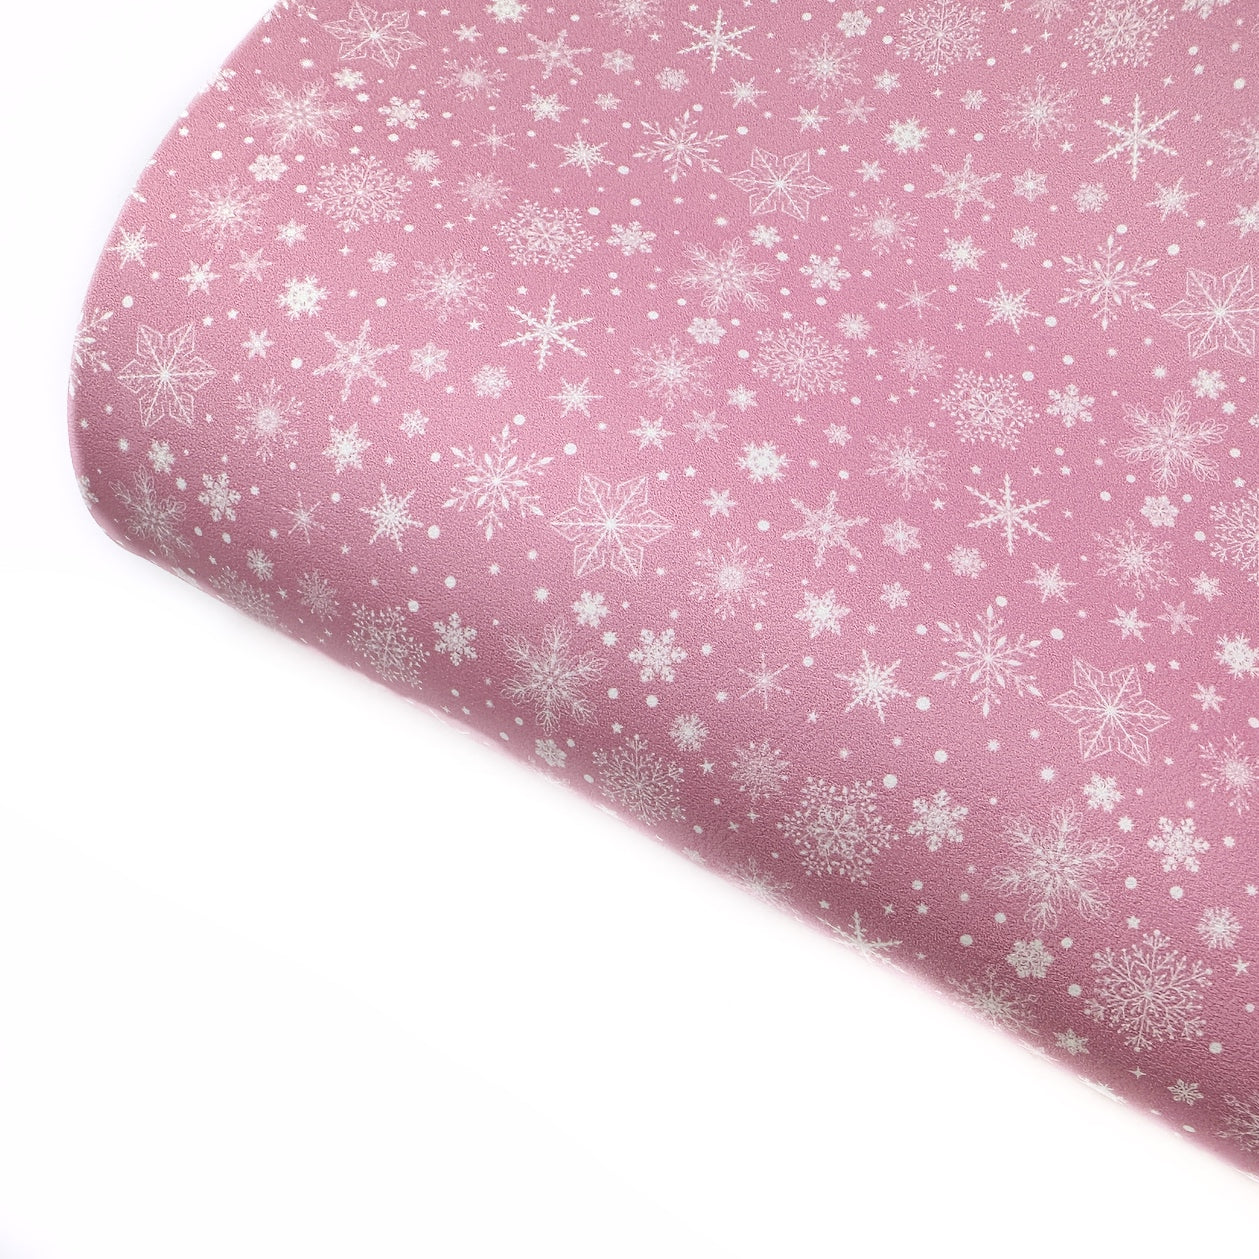 Pink Falling Snowflakes Premium Faux Leather Fabric Sheets